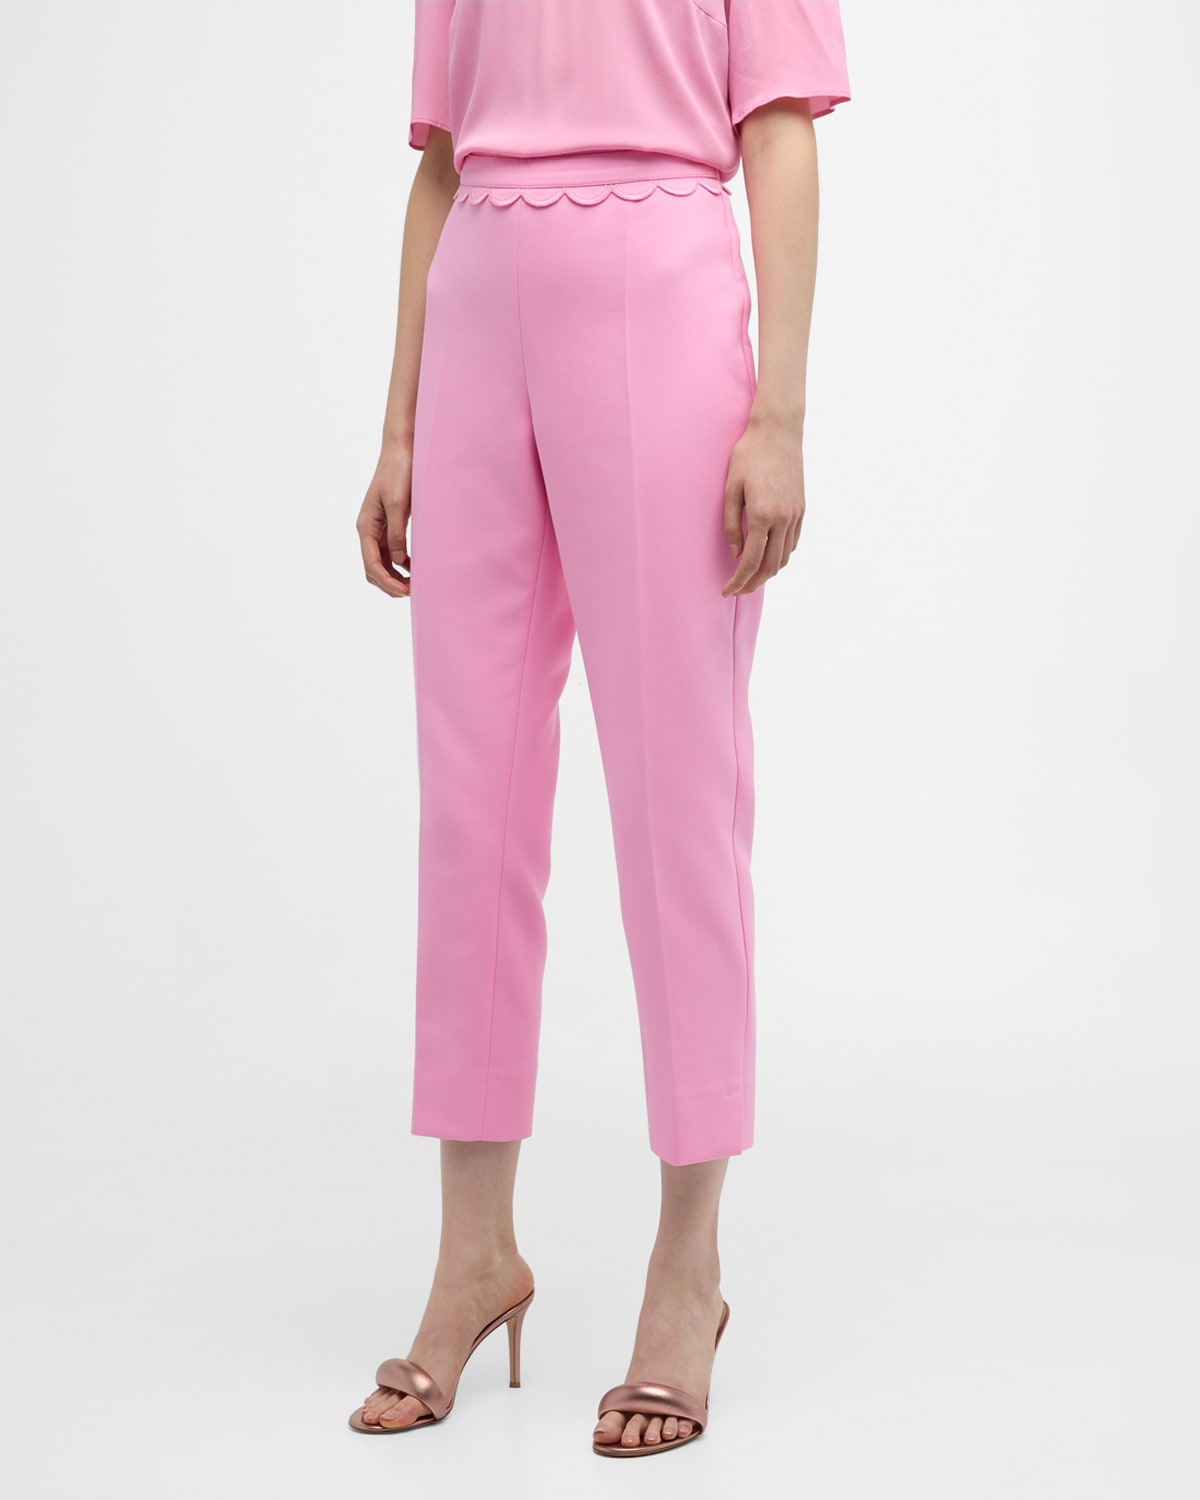 Maison Common High-rise Scalloped Waist Detail Slim-leg Ankle Cotton Trousers In Pink